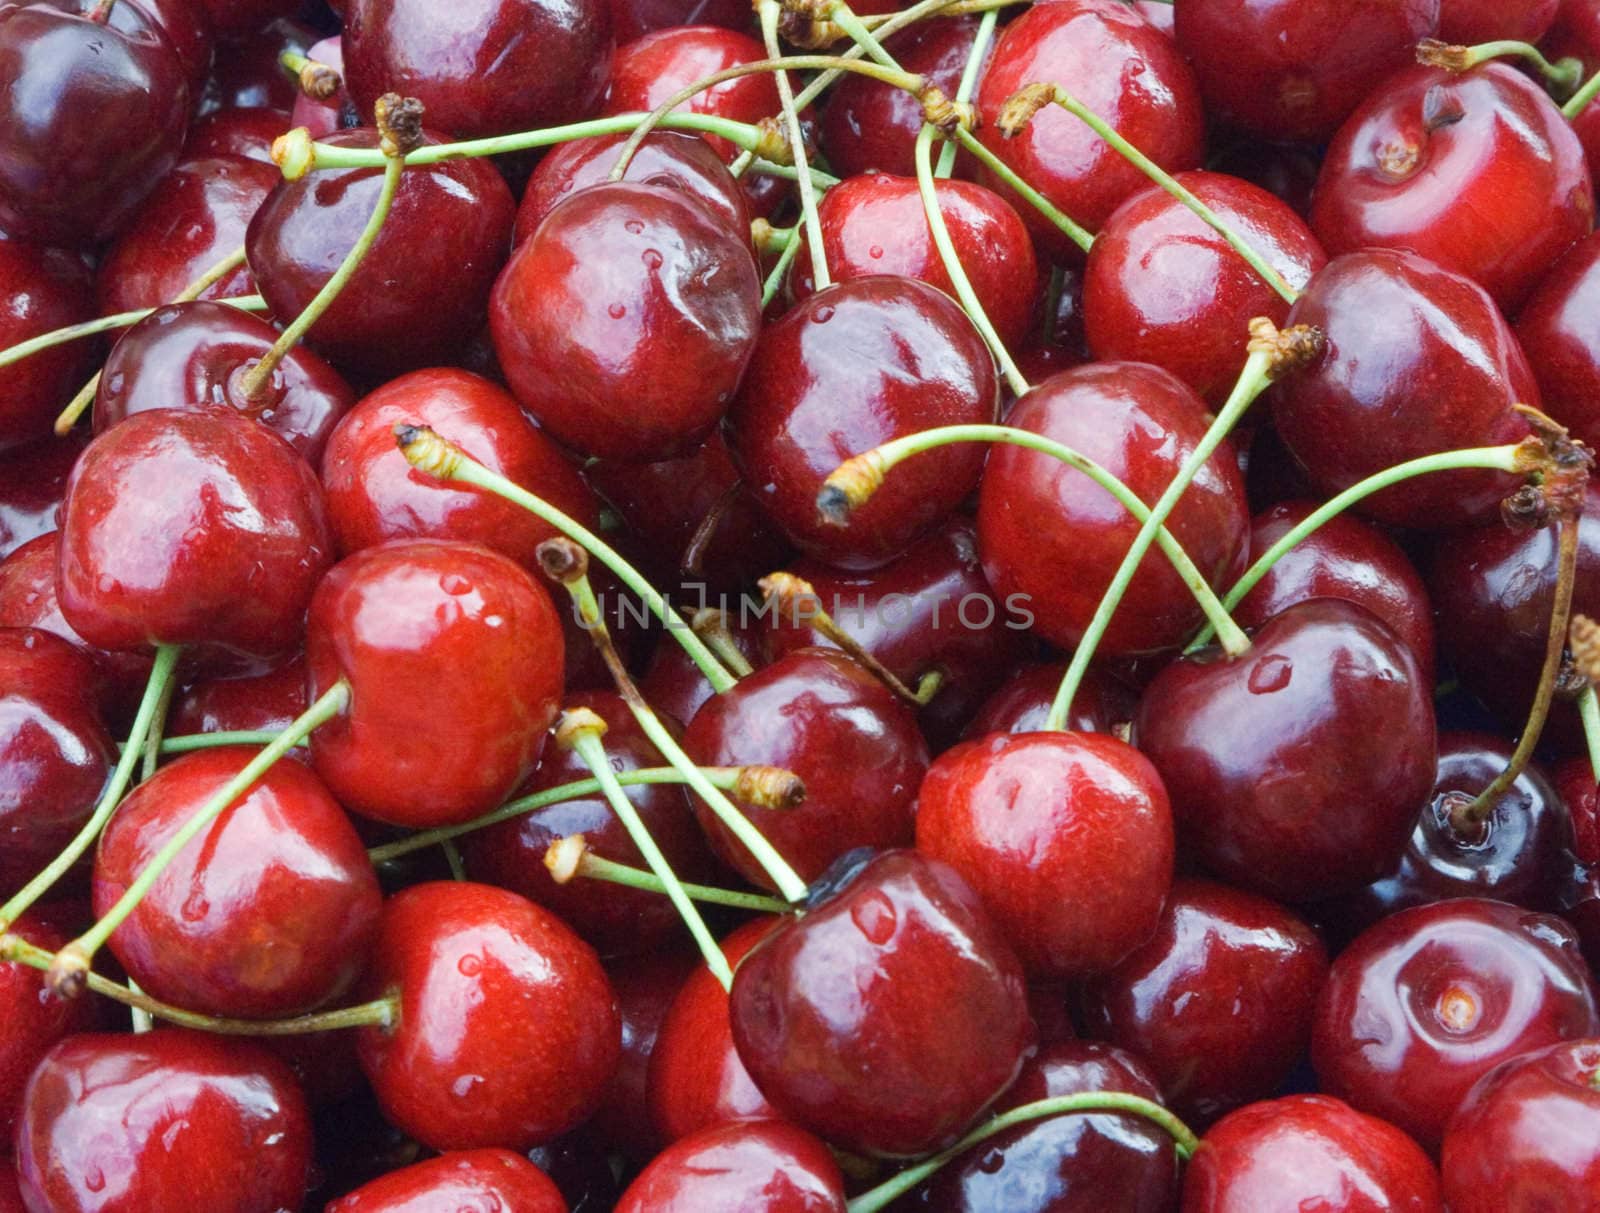 a group of ripe, juicy, fresh sweet cherries. close-up